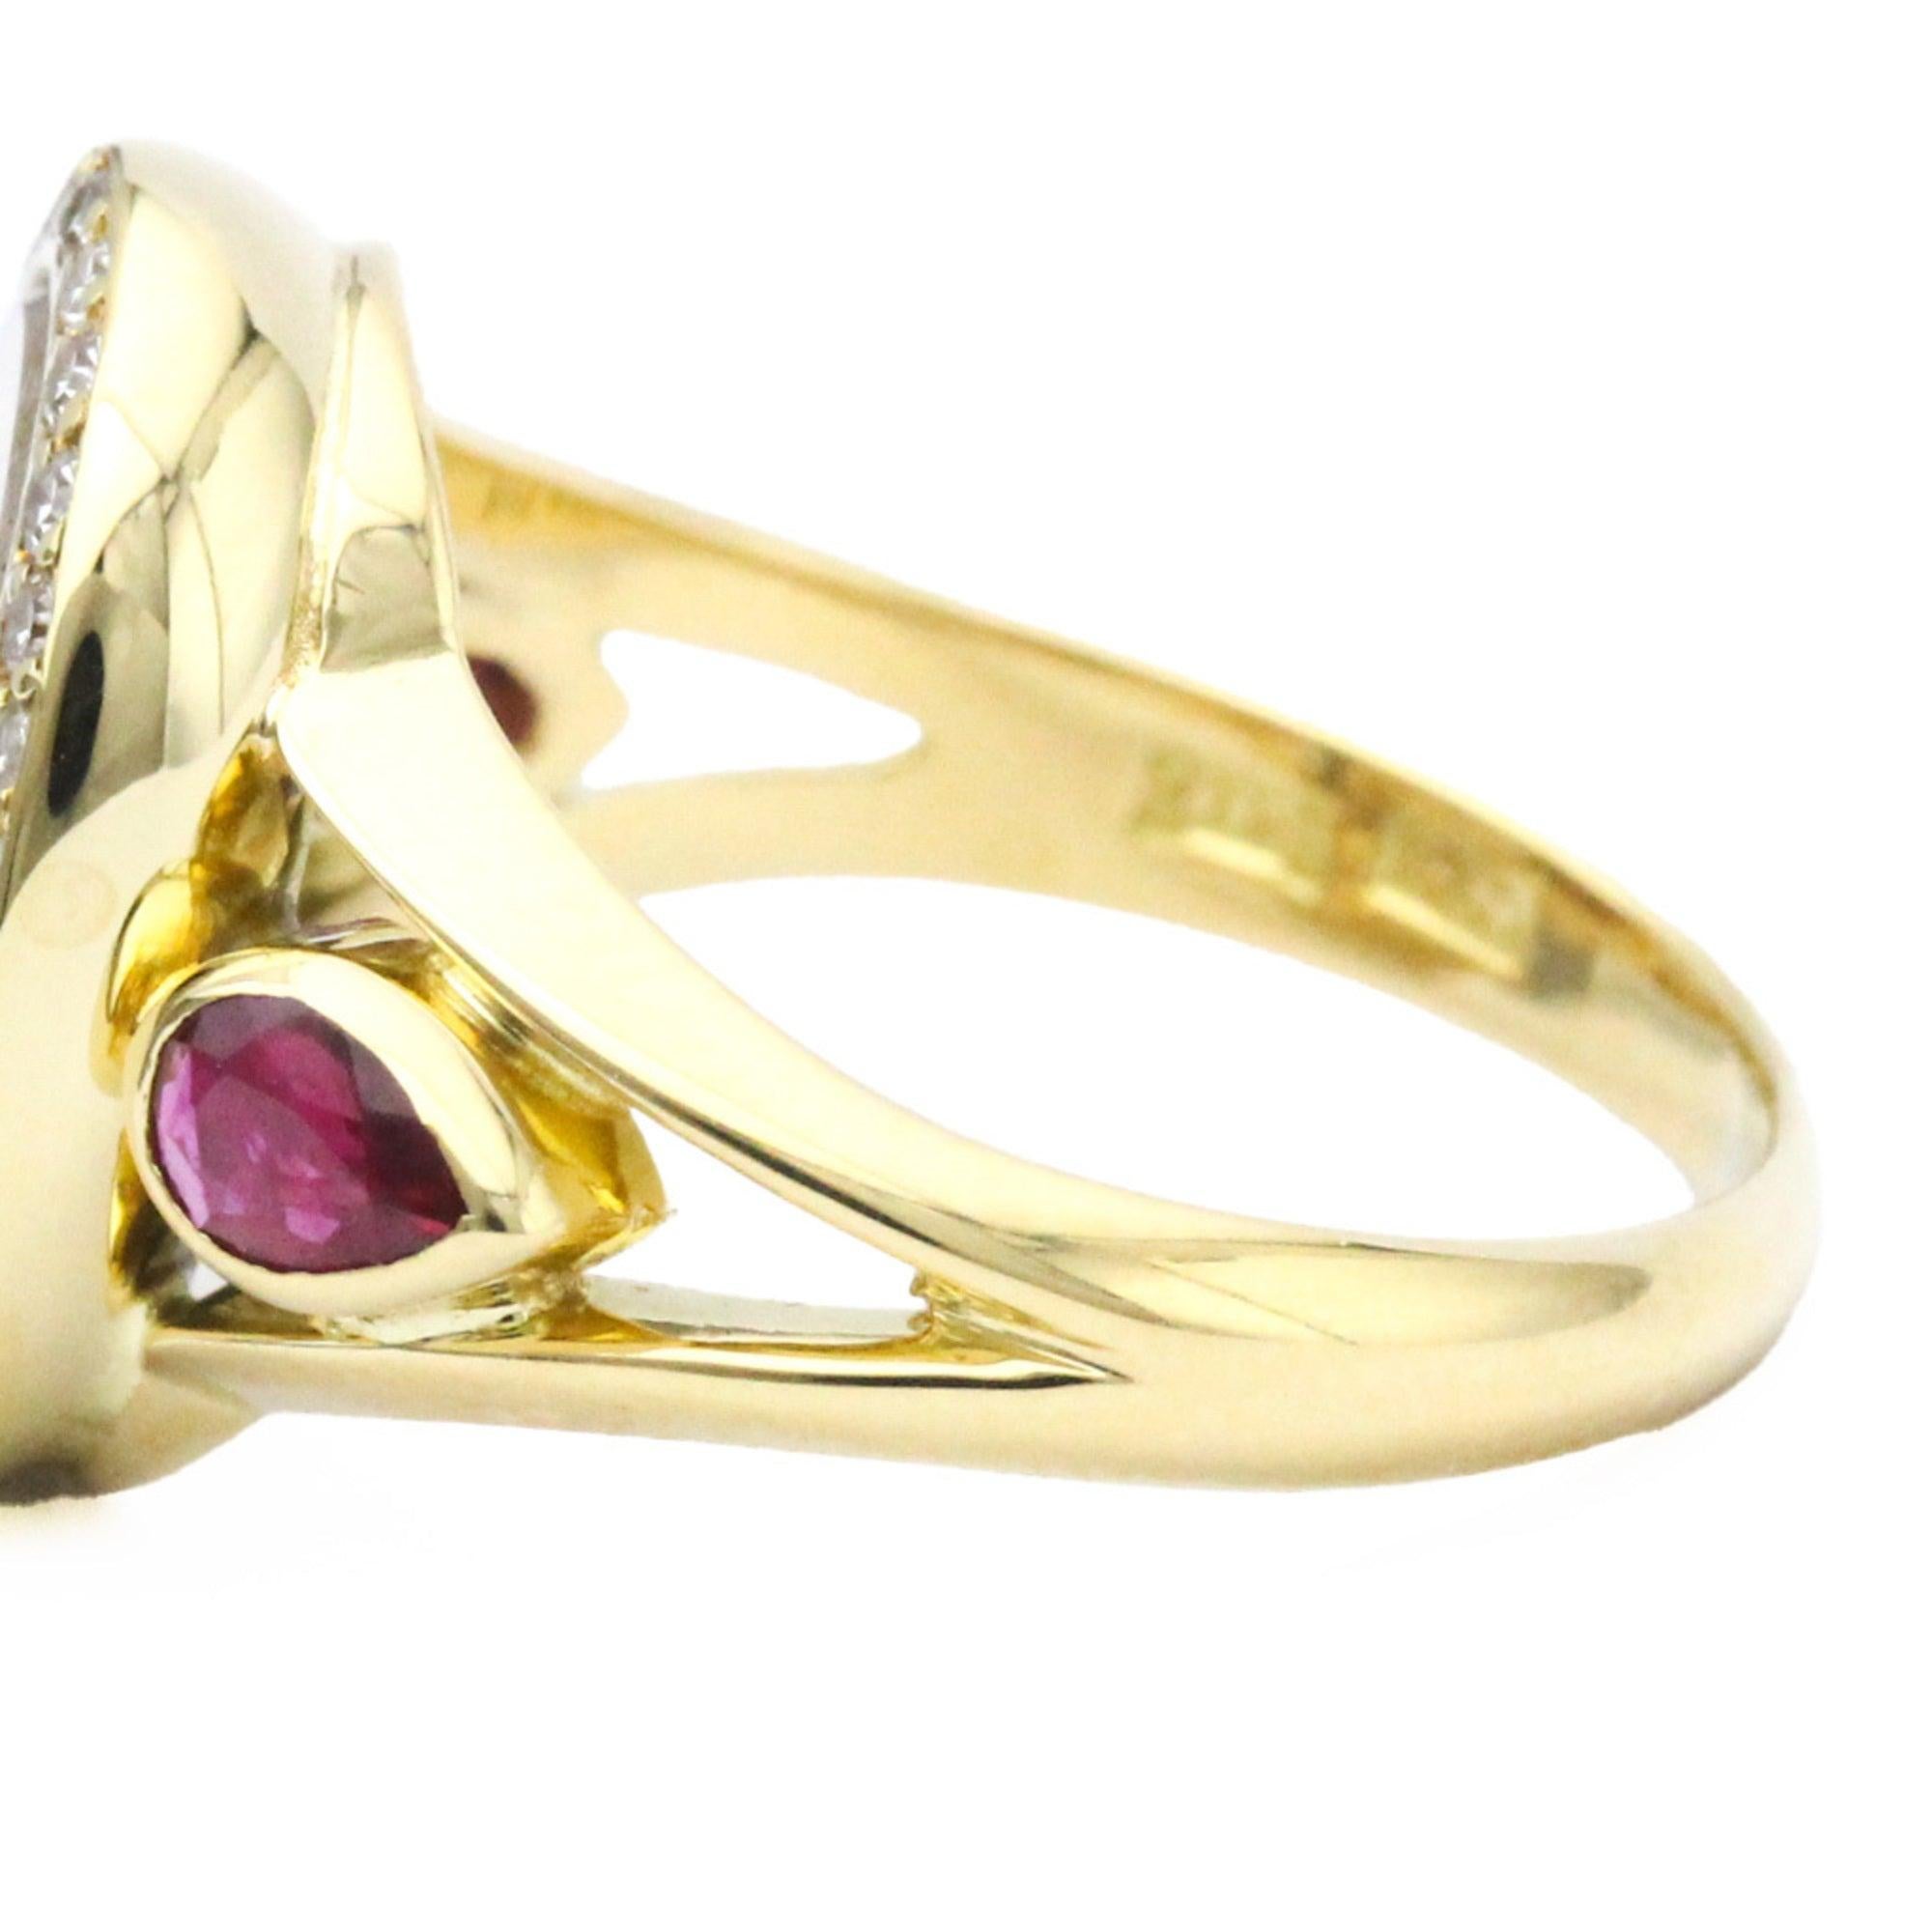 Chopard Oval Diamond, Ruby Band Ring in 18K Yellow Gold 

Additional information:
Brand: Chopard
Gender: Men,Women
Model: happy diamond oval
Gemstone: Diamond, Ruby
Material: Yellow gold (18K)
Ring size (US): 6
Condition detail: This item has been